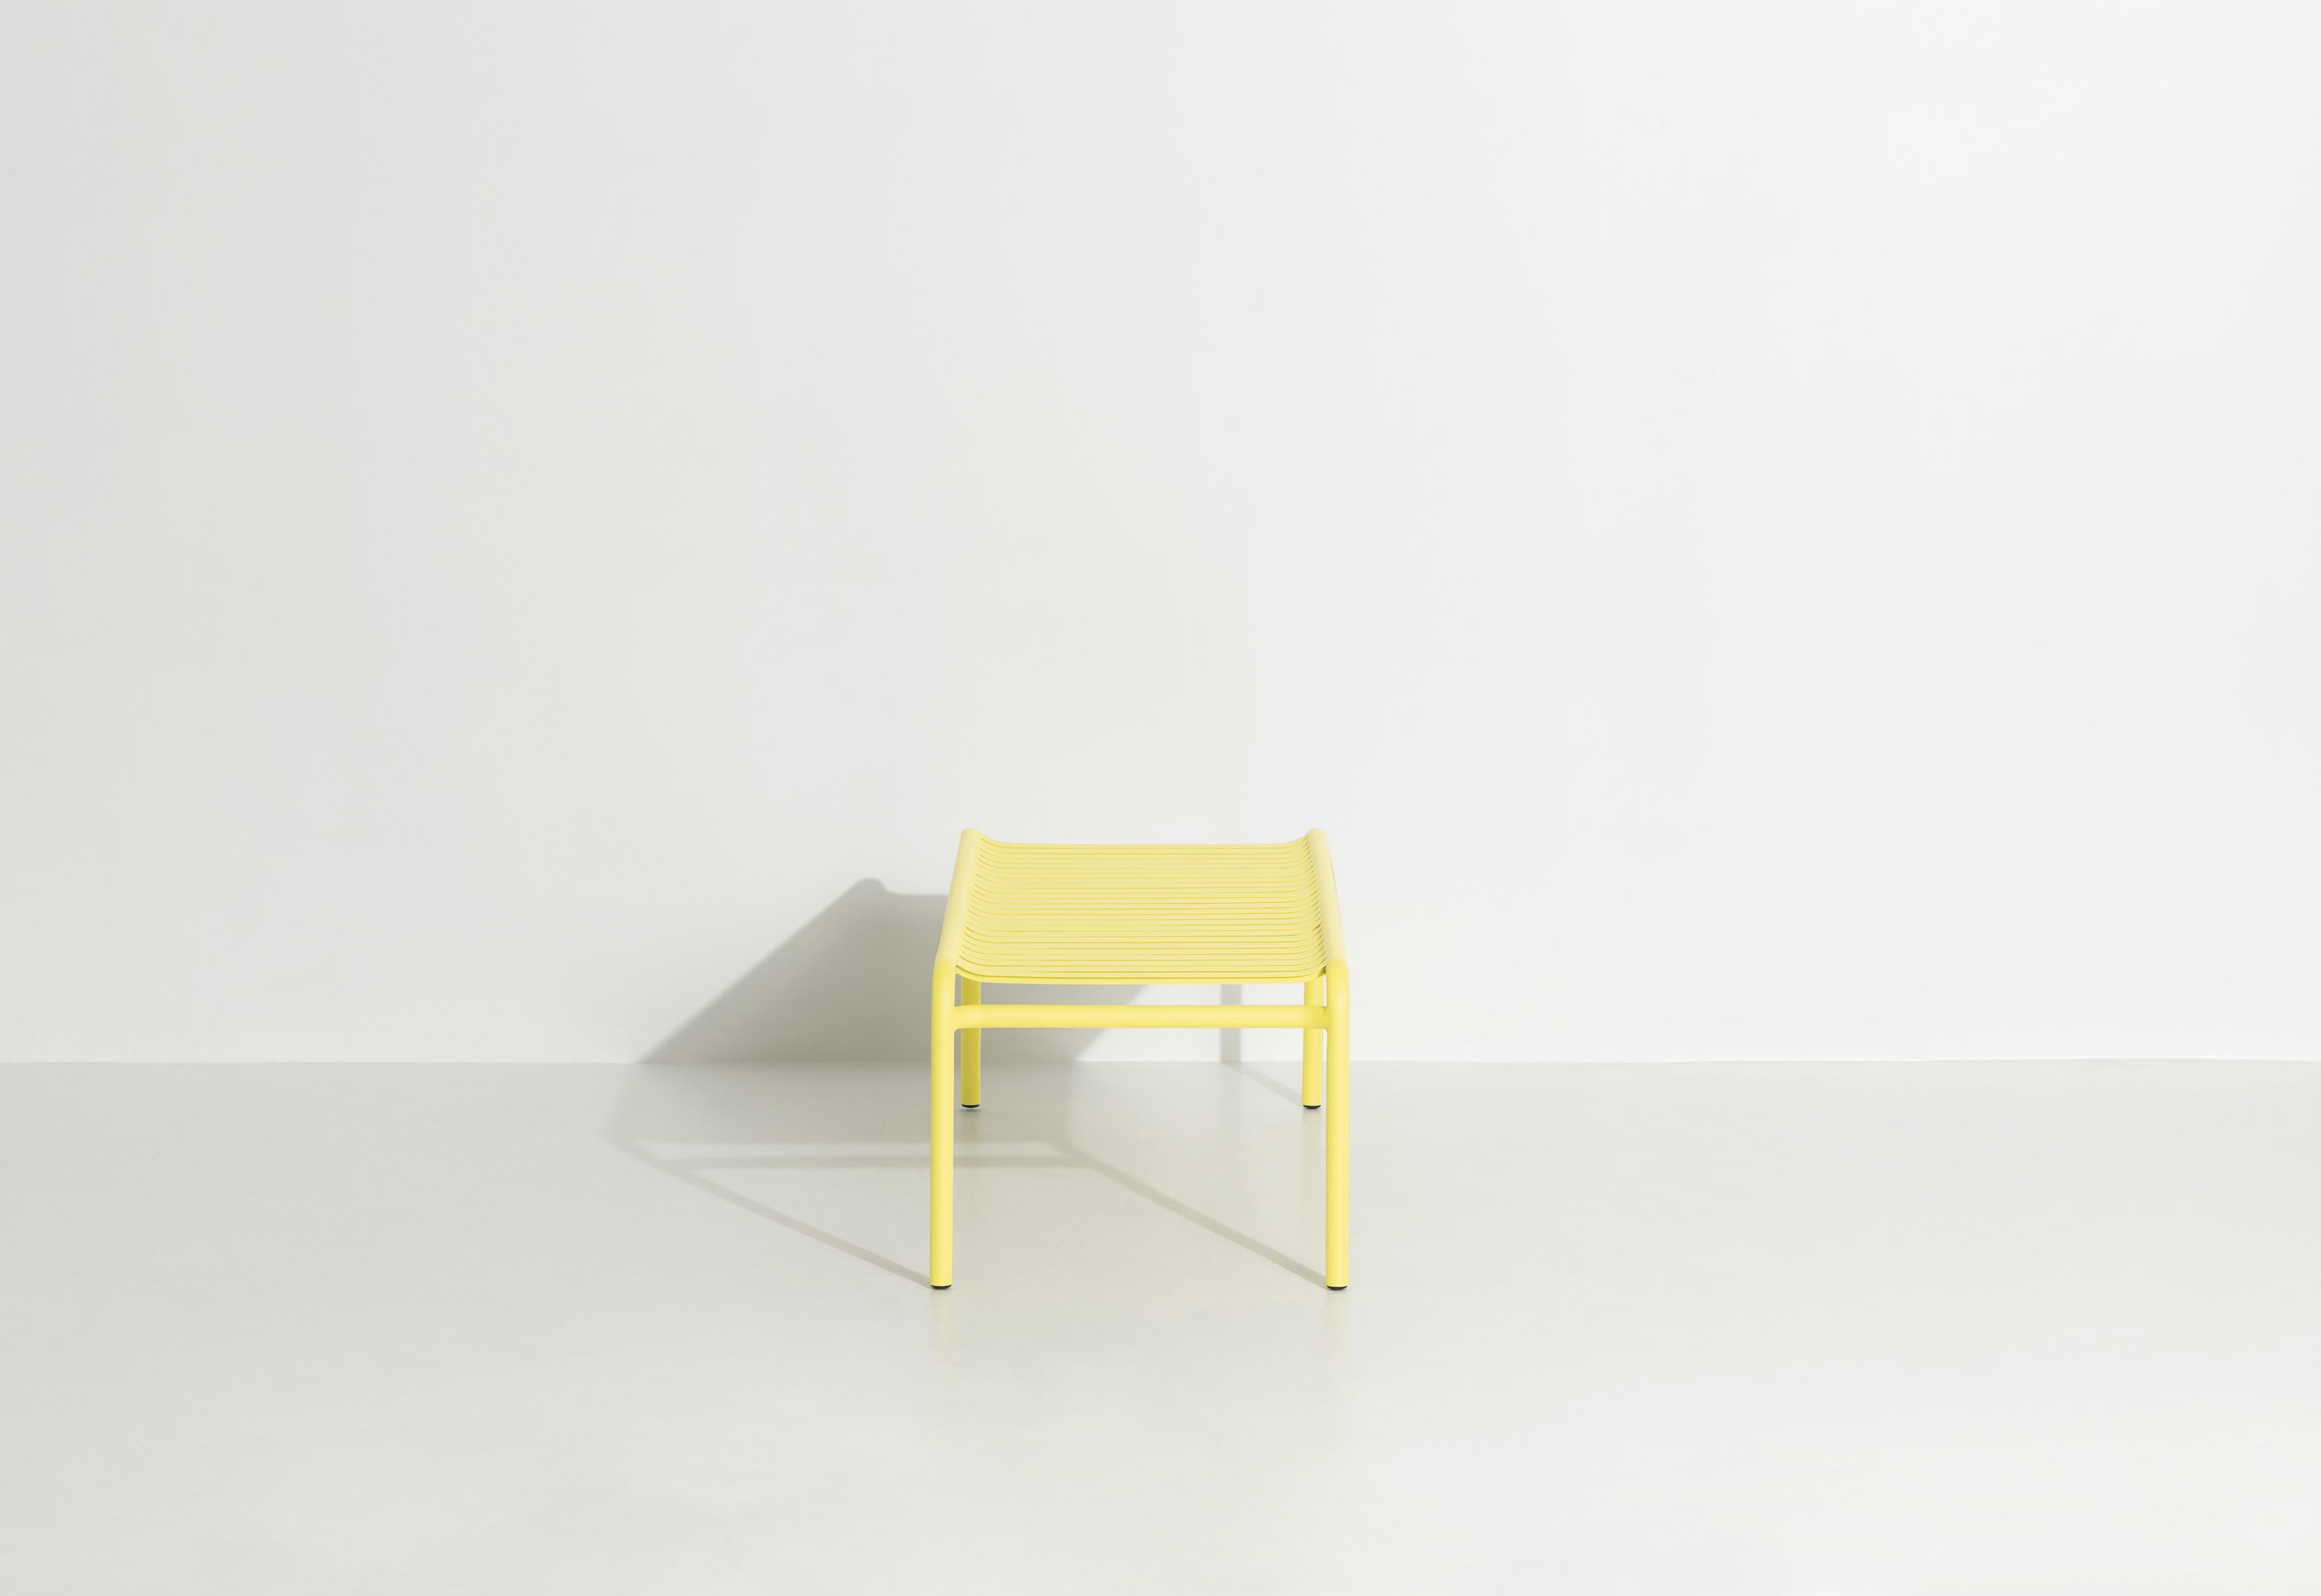 Petite Friture Week-End Long Coffee Table in Yellow Aluminium, 2017 In New Condition For Sale In Brooklyn, NY